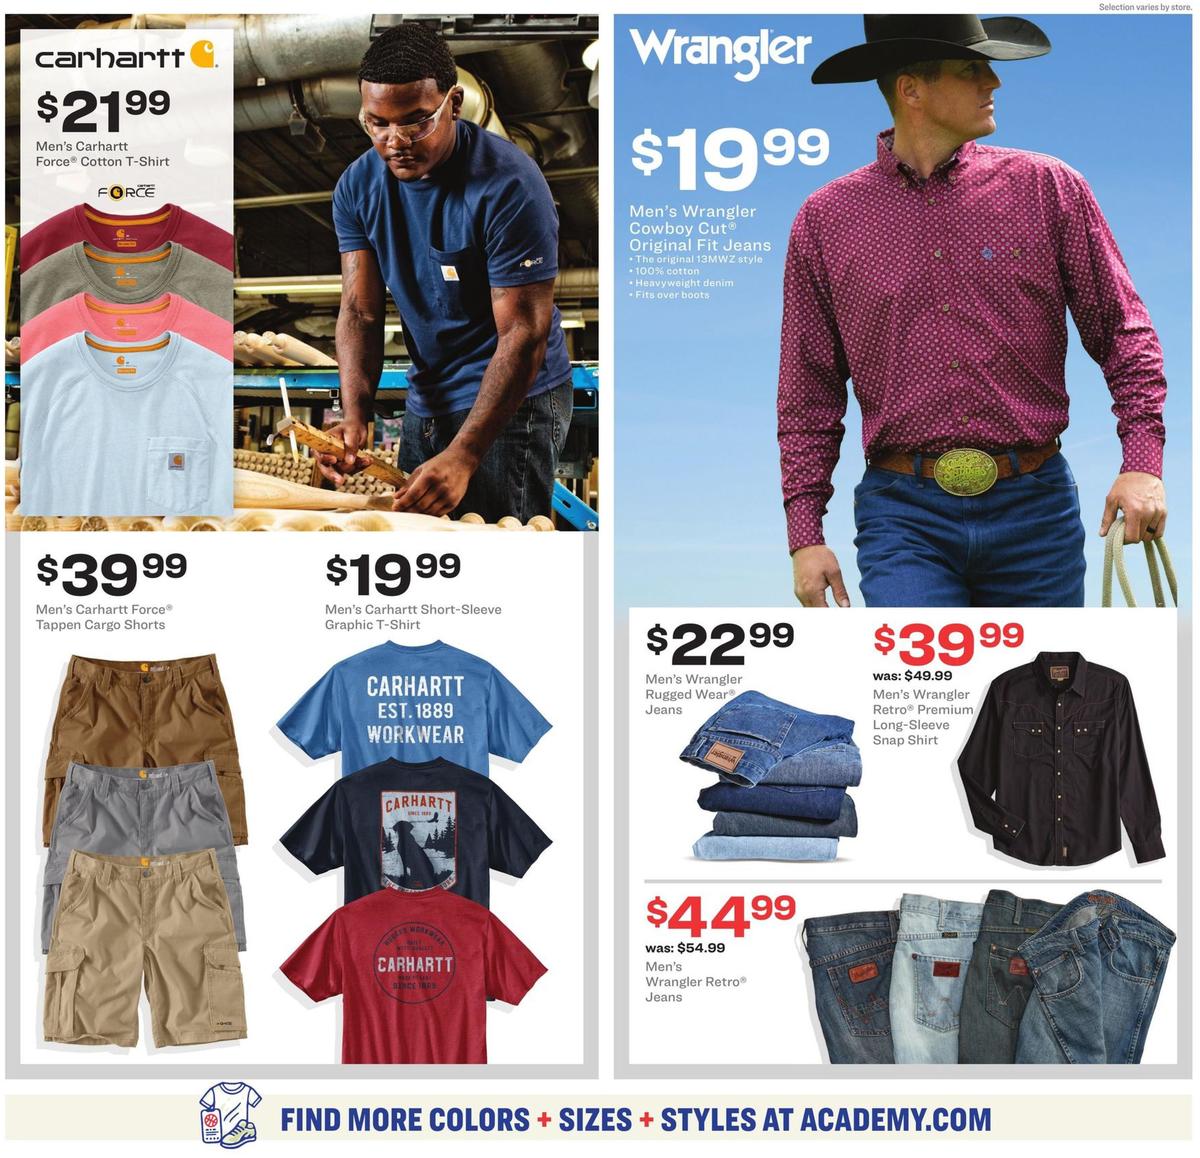 Academy Sports + Outdoors Outdoor Ad Weekly Ad from March 16